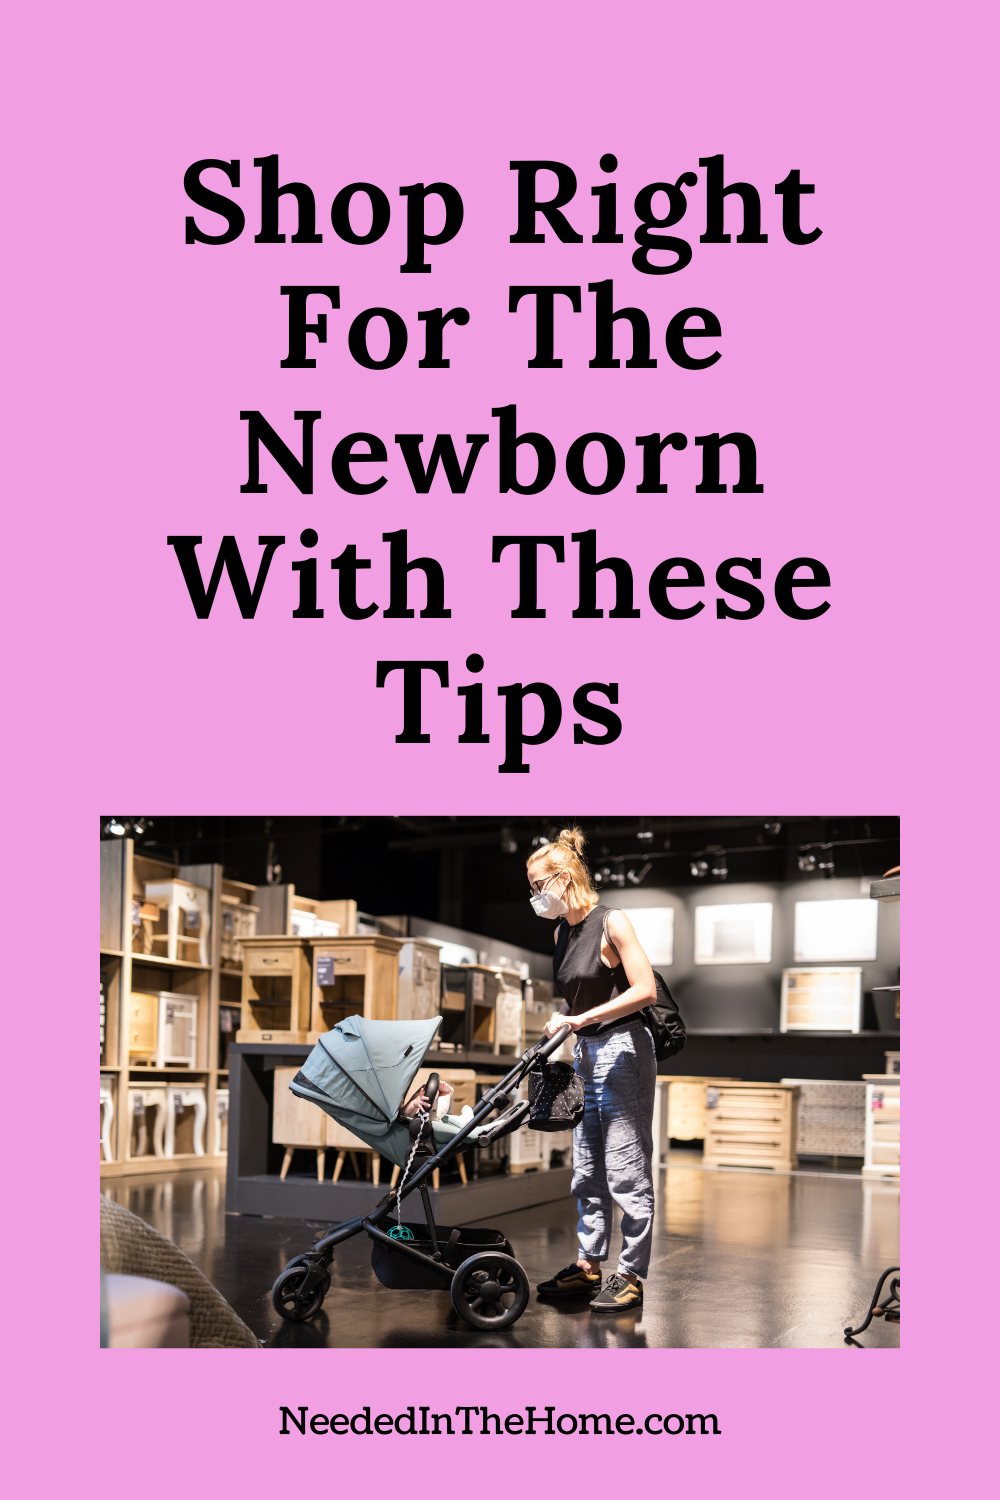 pinterest-pin-description shop right for the newborn with these tips mother pushing stroller newborn in childrens nursery furniture store neededinthehome